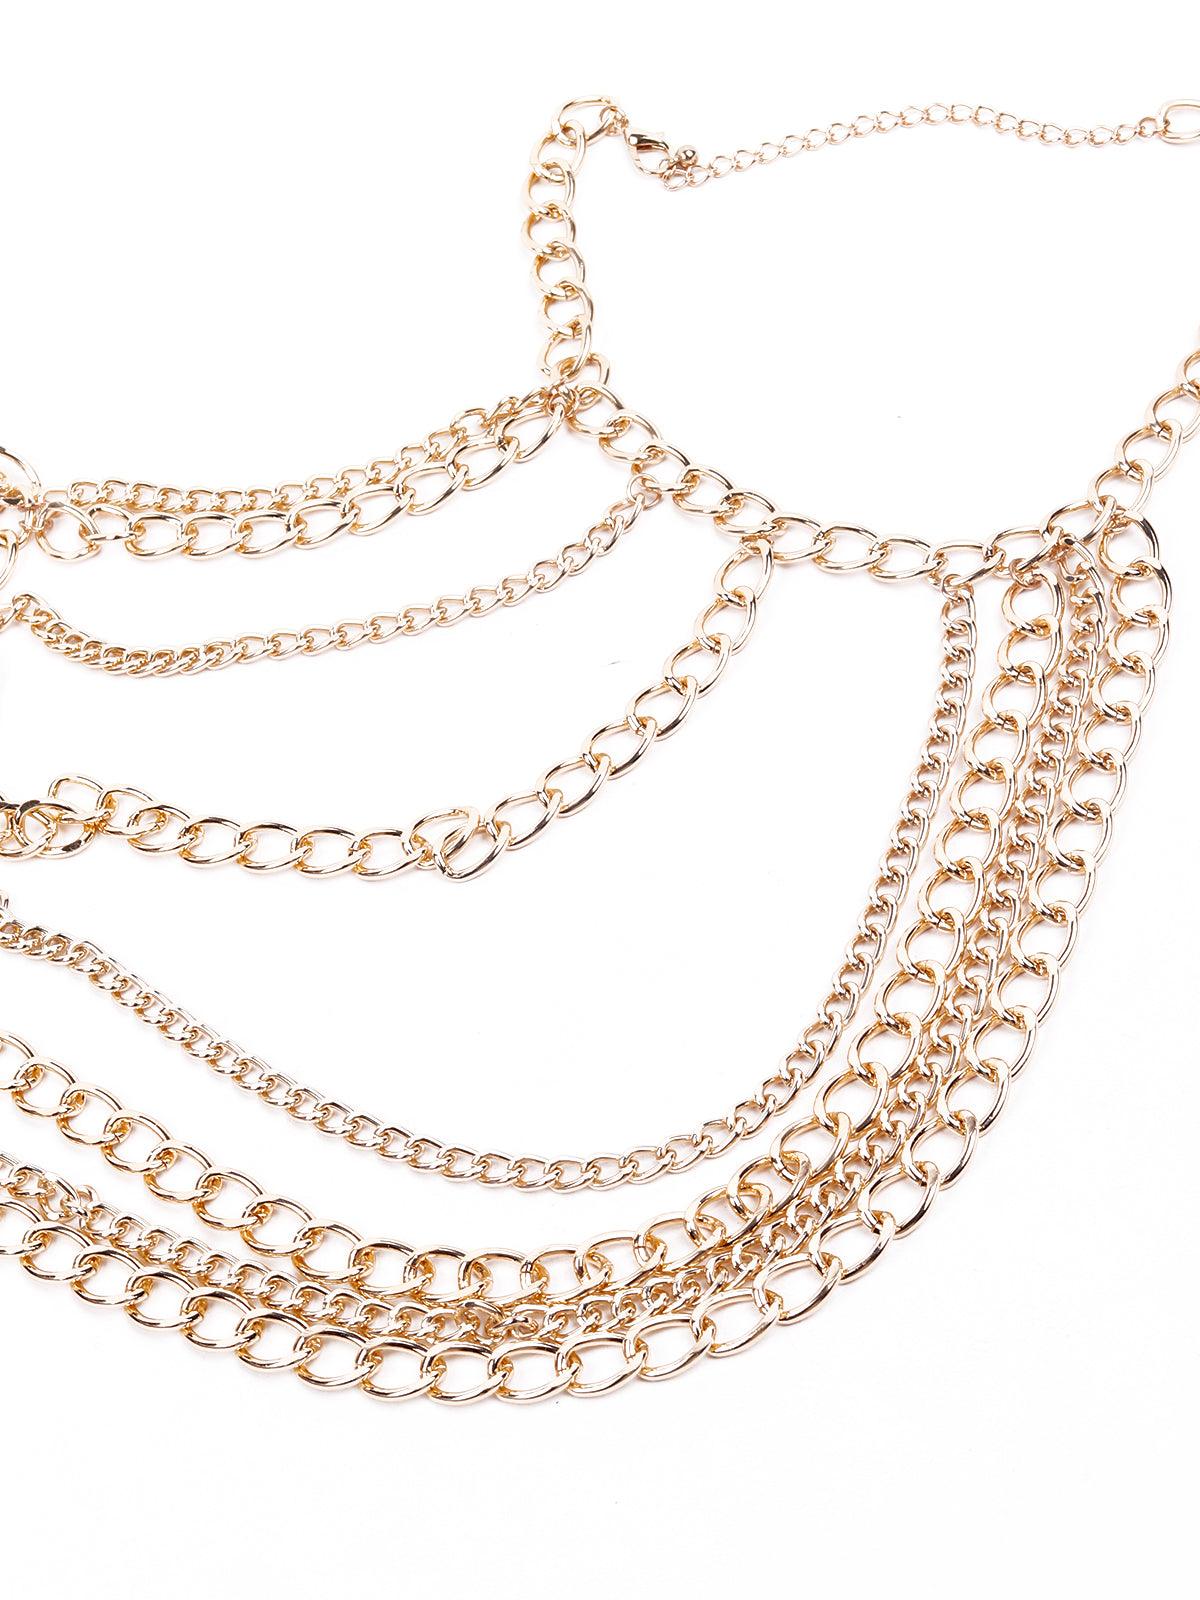 Women's Multilayered Gold Tone Necklace - Odette